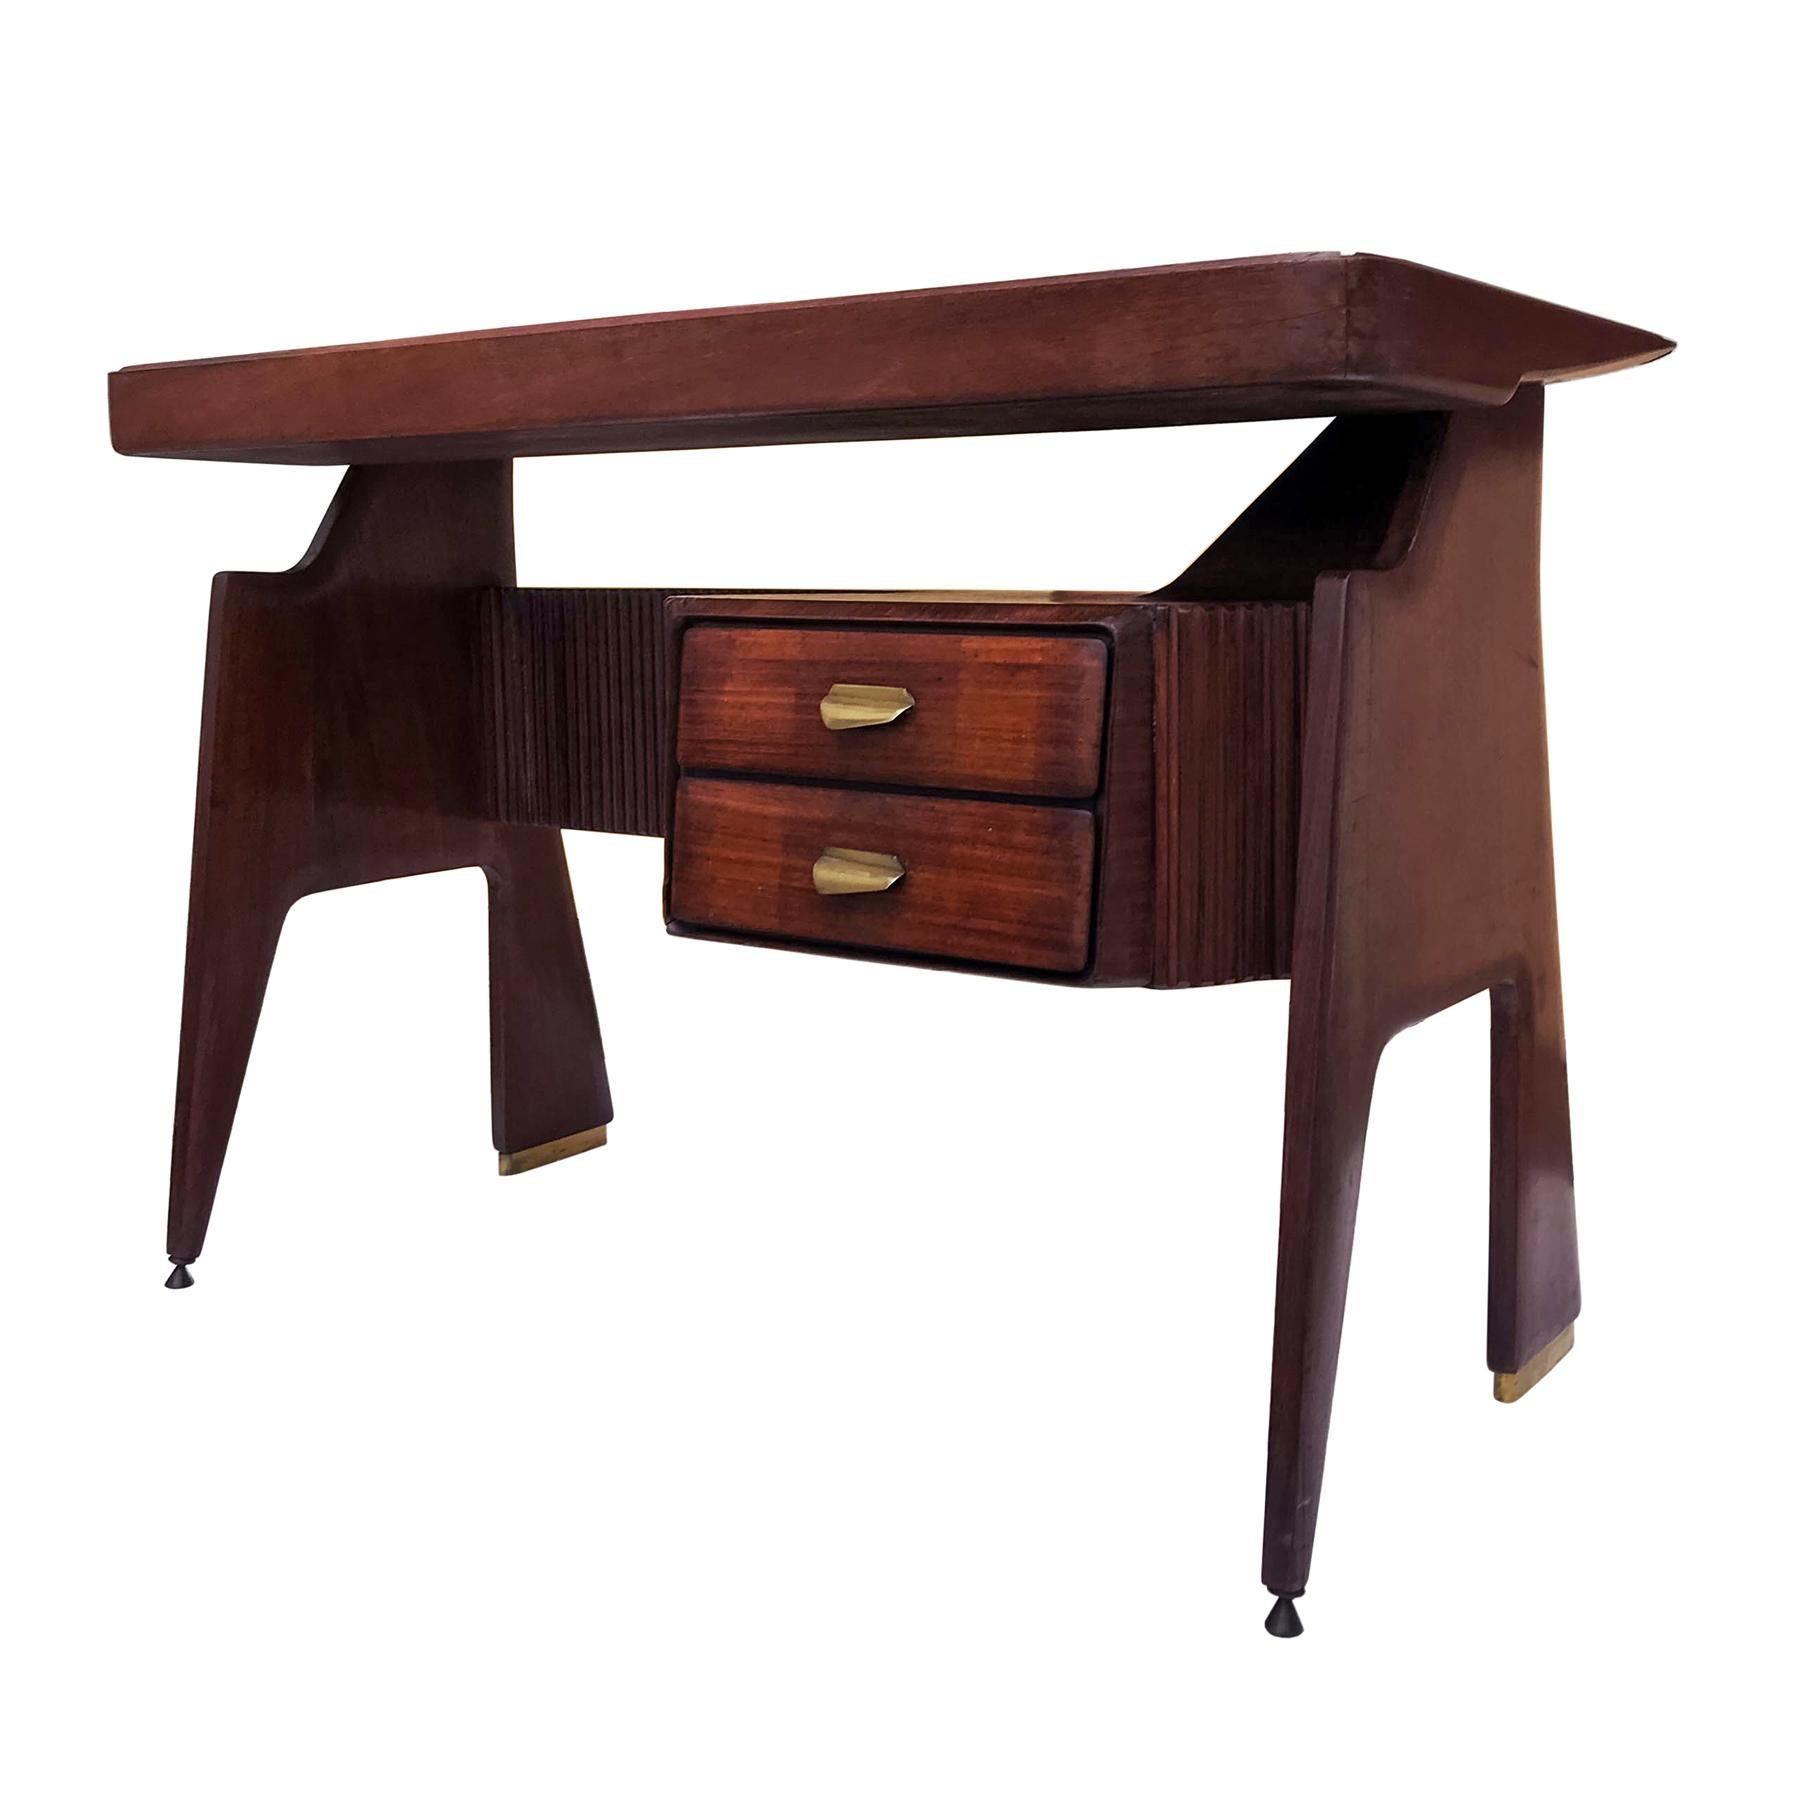 This amazing writing desk has been made in Italy over the years 1950s and its design is attributable to Vittorio Dassi.
It has a stylish and unusual shape, all around finished with superb reeded details.
The structure is Italian walnut and it’s